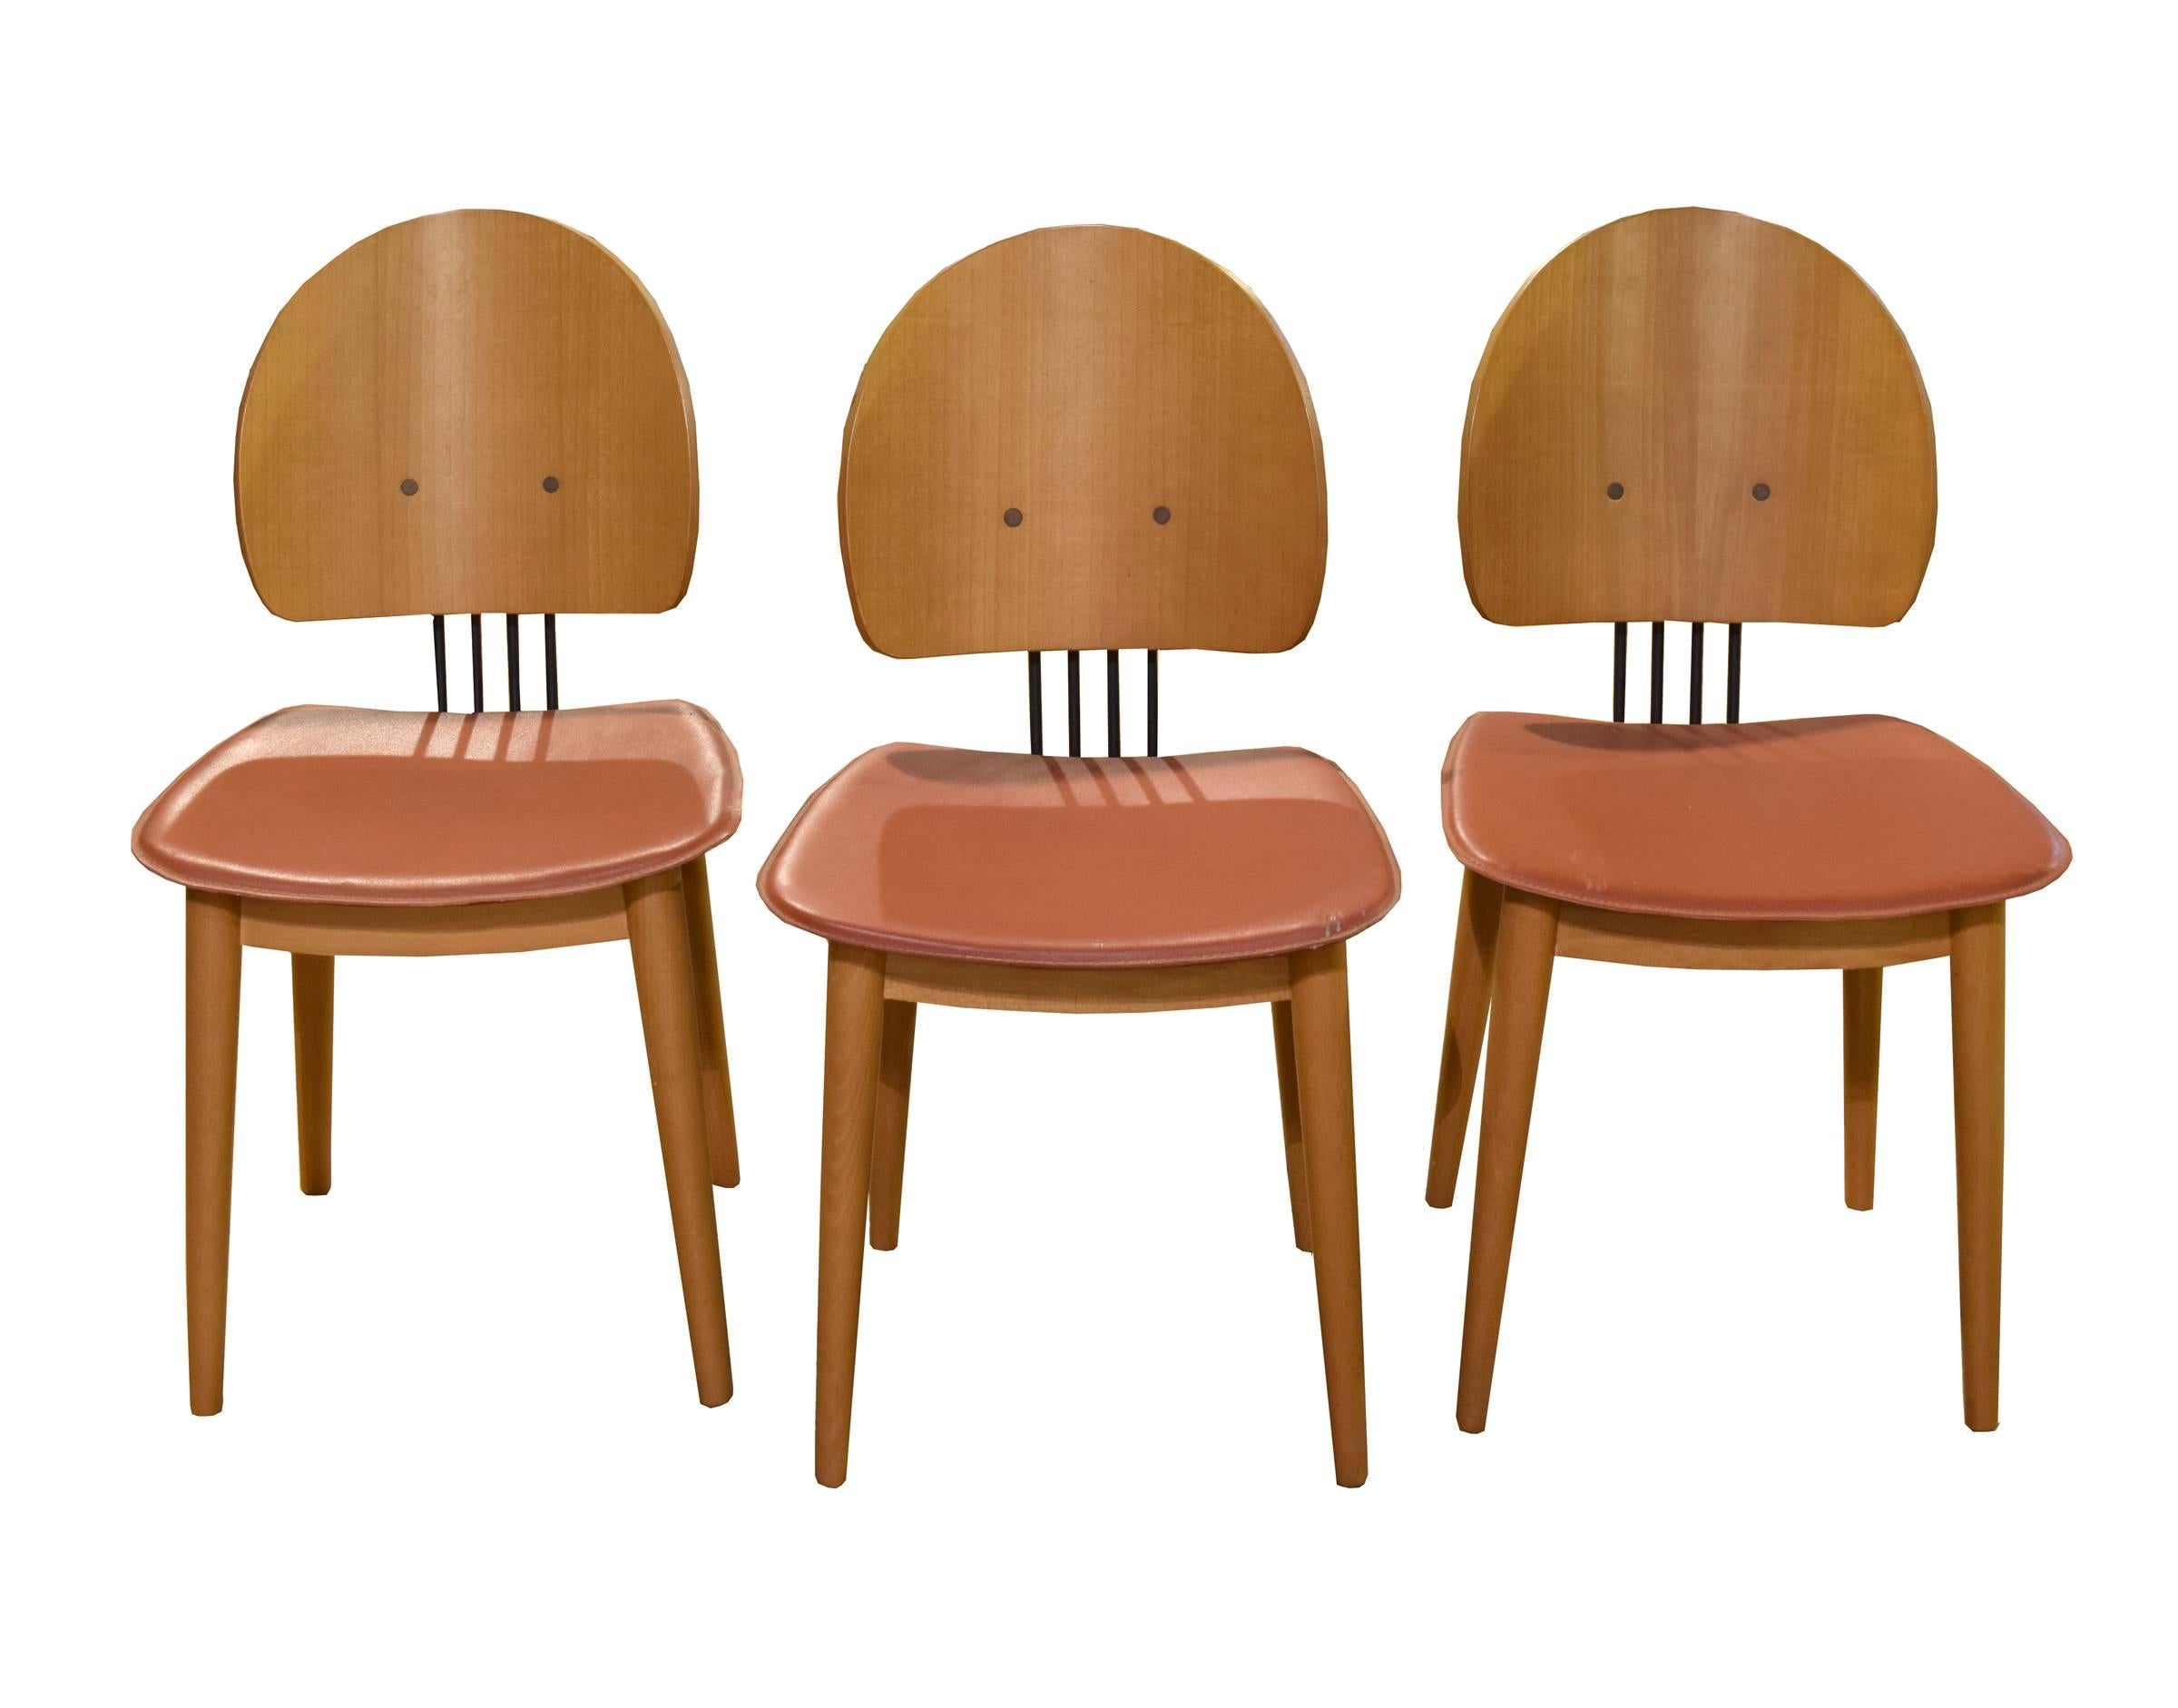 A set of six Mid-Century Modern chairs from Italy. These Mid-Century Modern chairs are made of bentwood with metal supports and mauve faux leather seats.